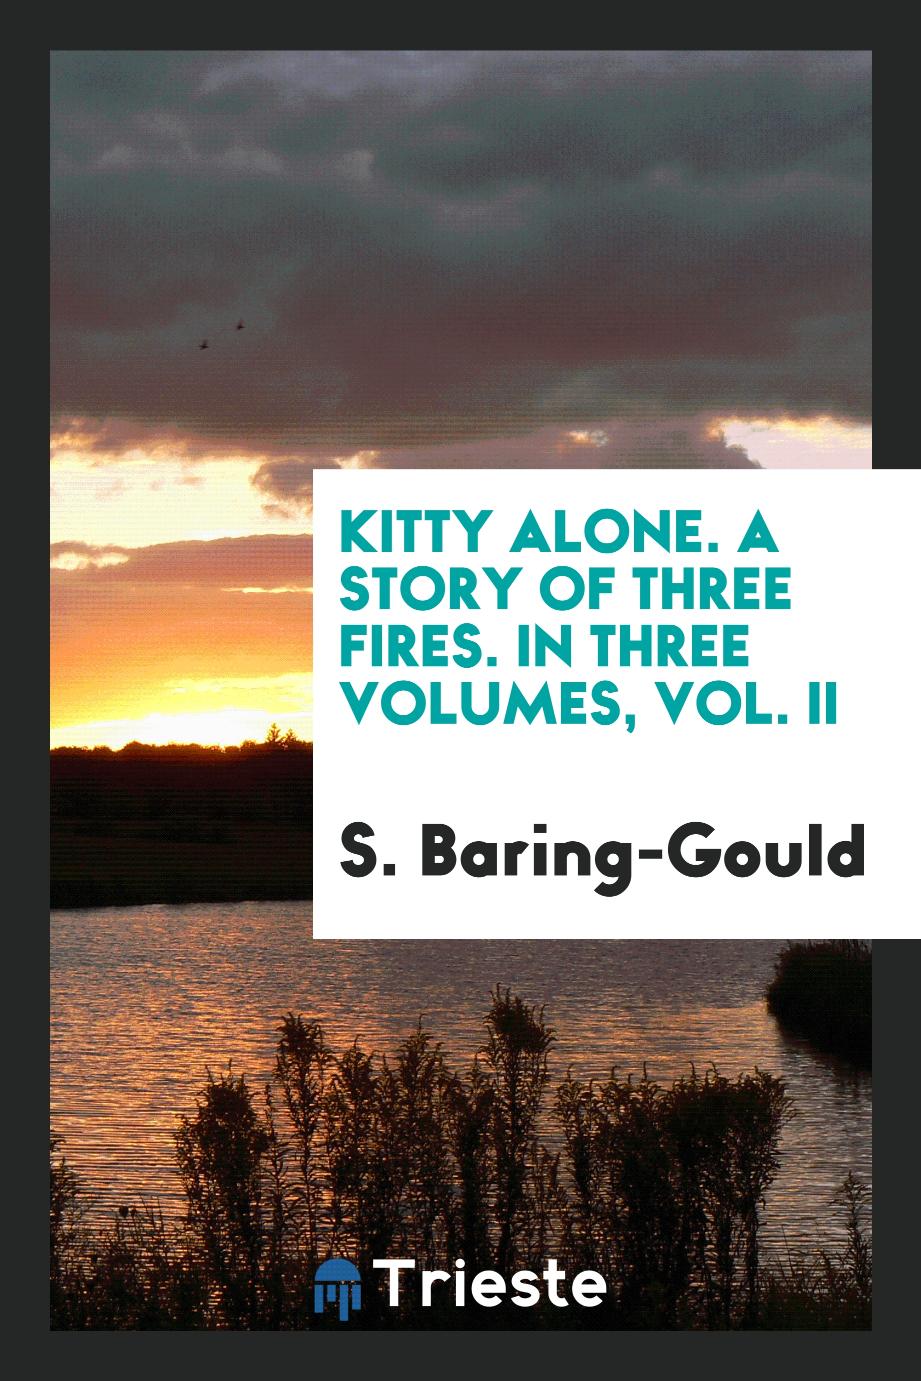 Kitty alone. A story of three fires. In three Volumes, Vol. II